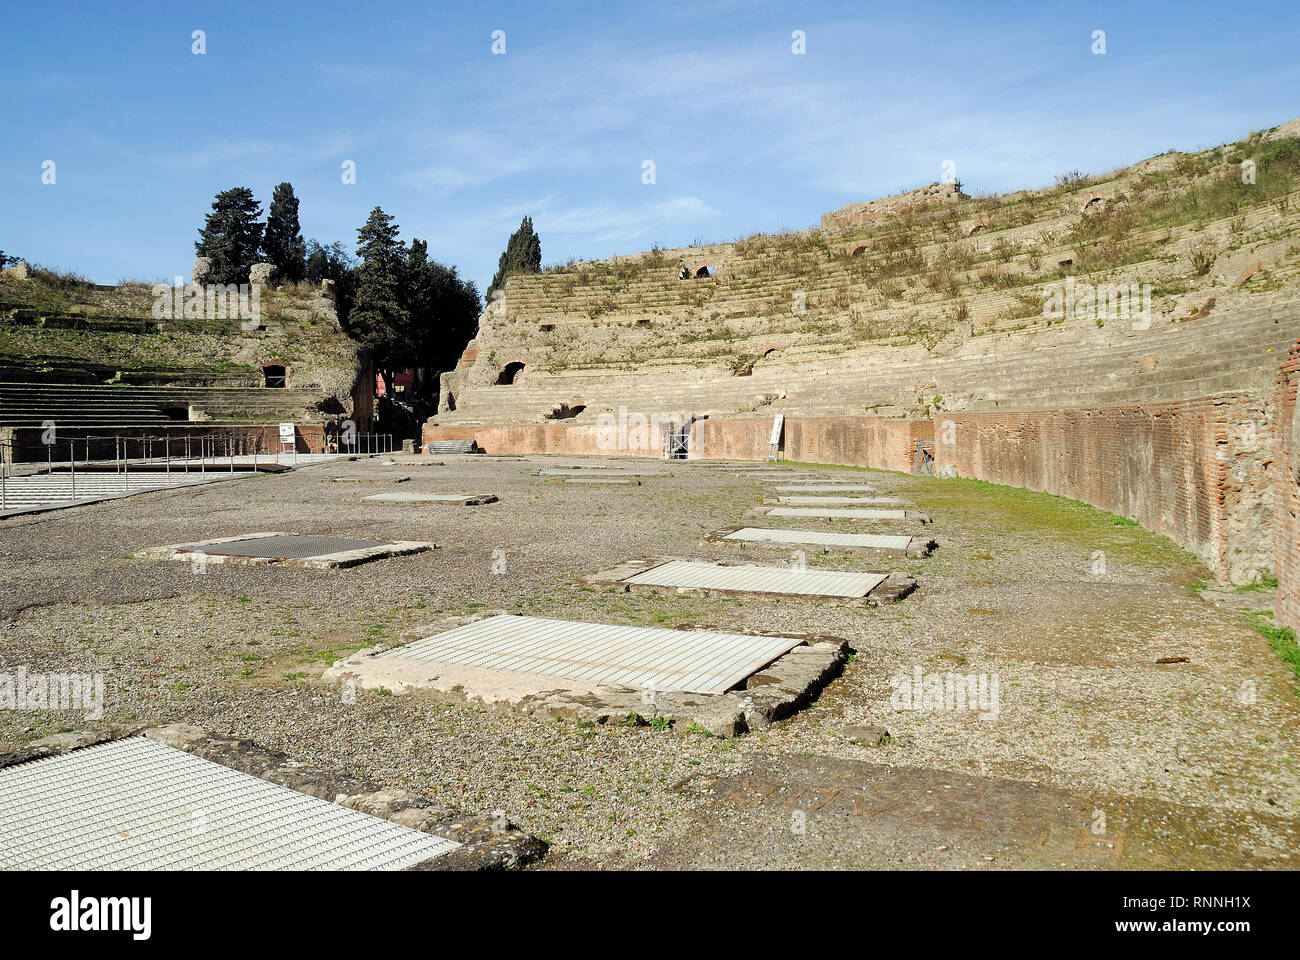 Pozzuoli, Campania, Italy. The cavea and the arena of the Pozzuoli Flavian Amphitheater. The amphitheater is the third largest after the Colosseum and the amphitheater of Santa Maria Capuavetere. It were used for events such as gladiator combats, venationes (animal hunts) and executions. Stock Photo